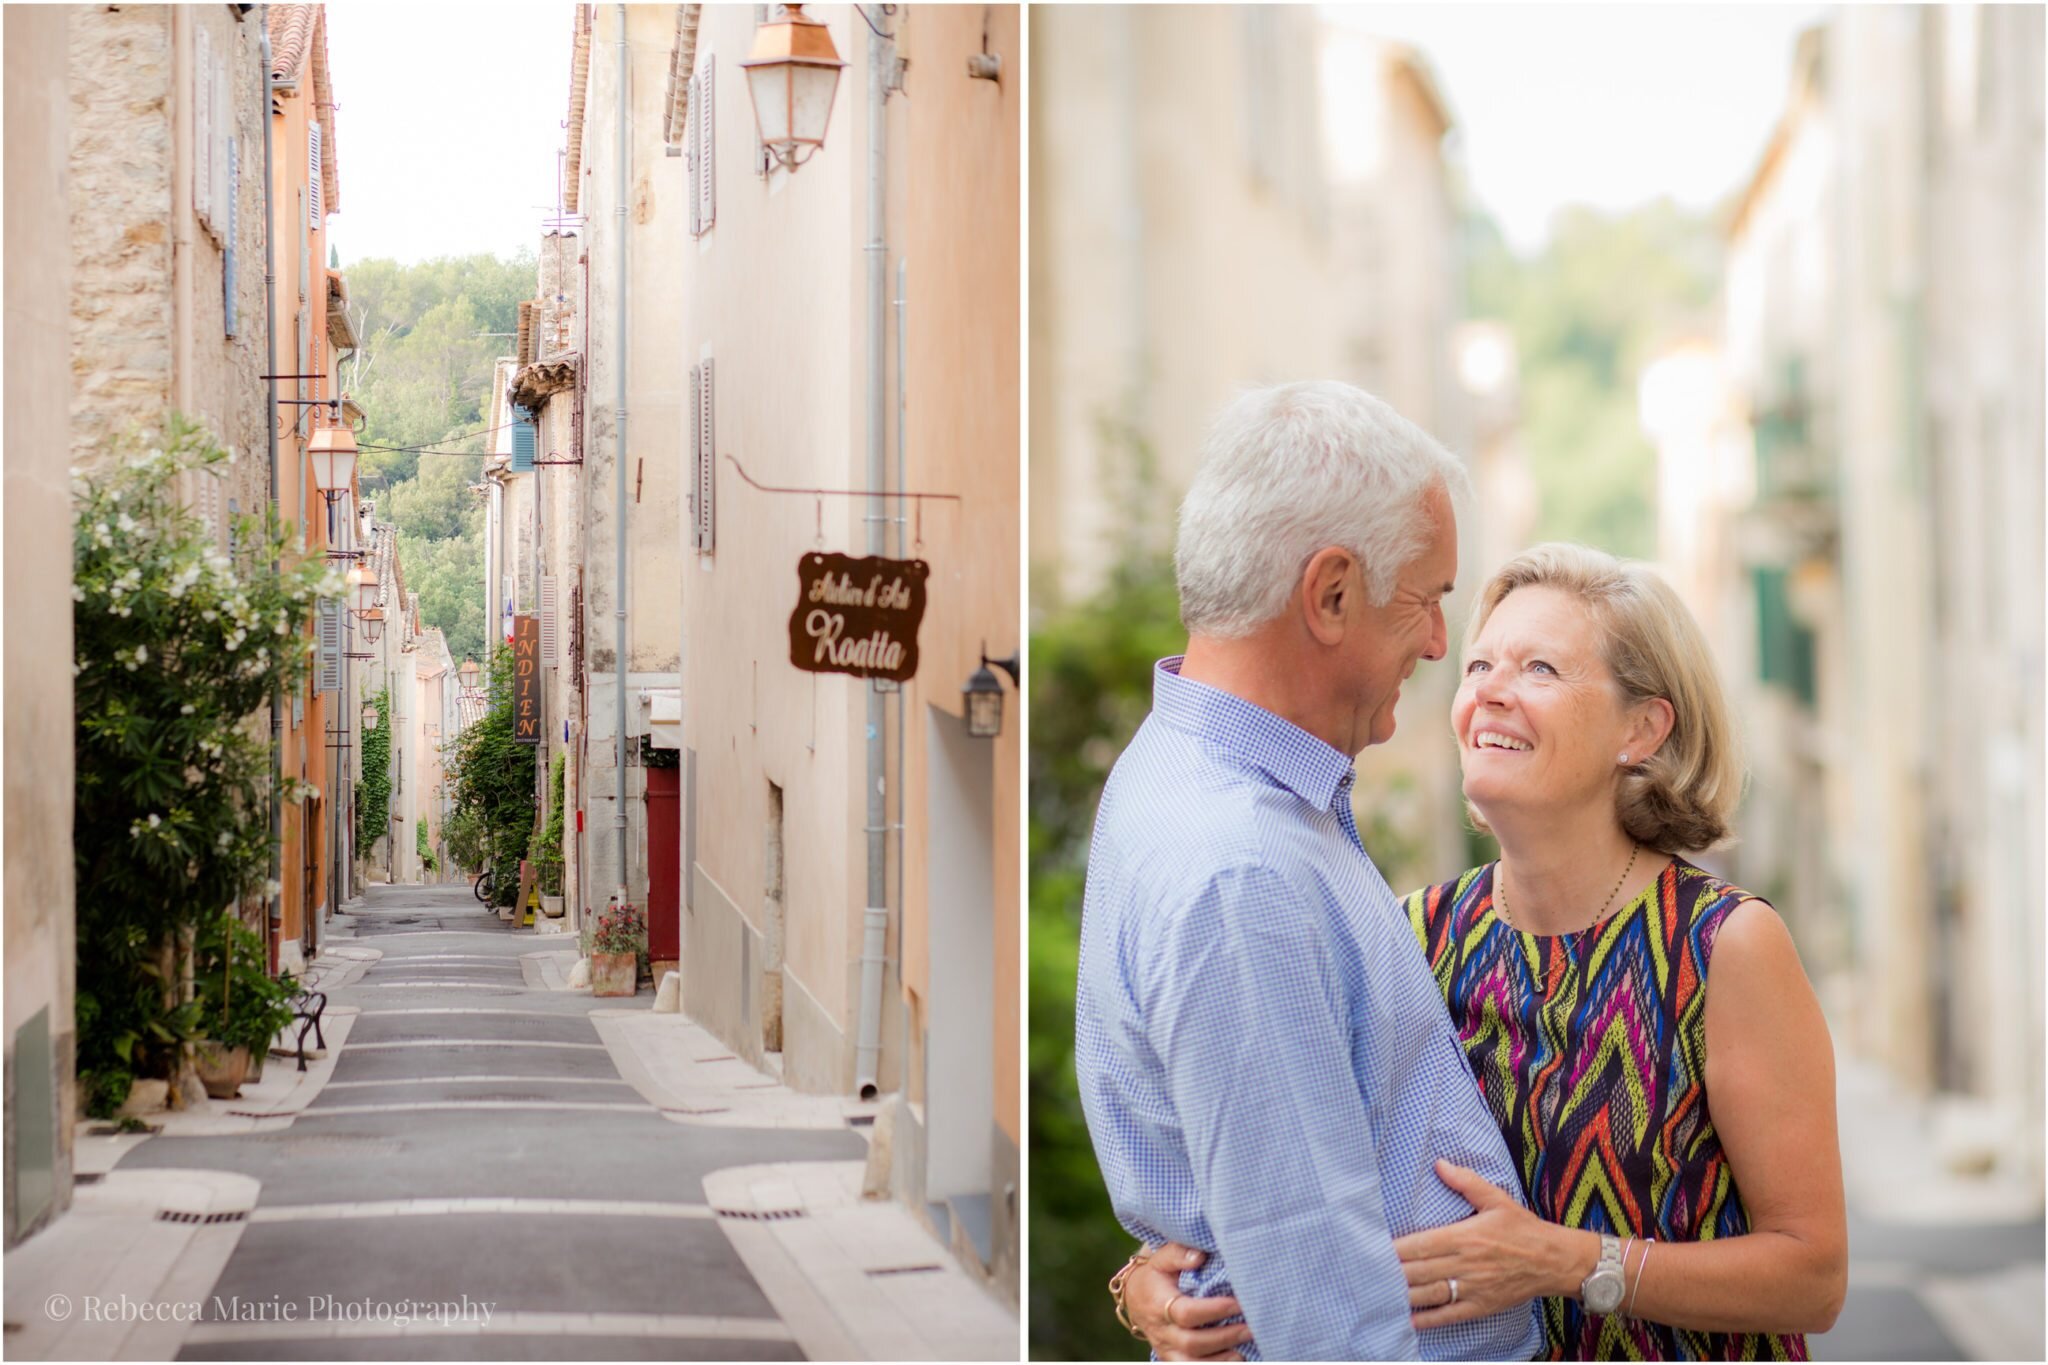 Portraits-in-France-Valbonne-Rebecca-Marie-Photography-18-2-1